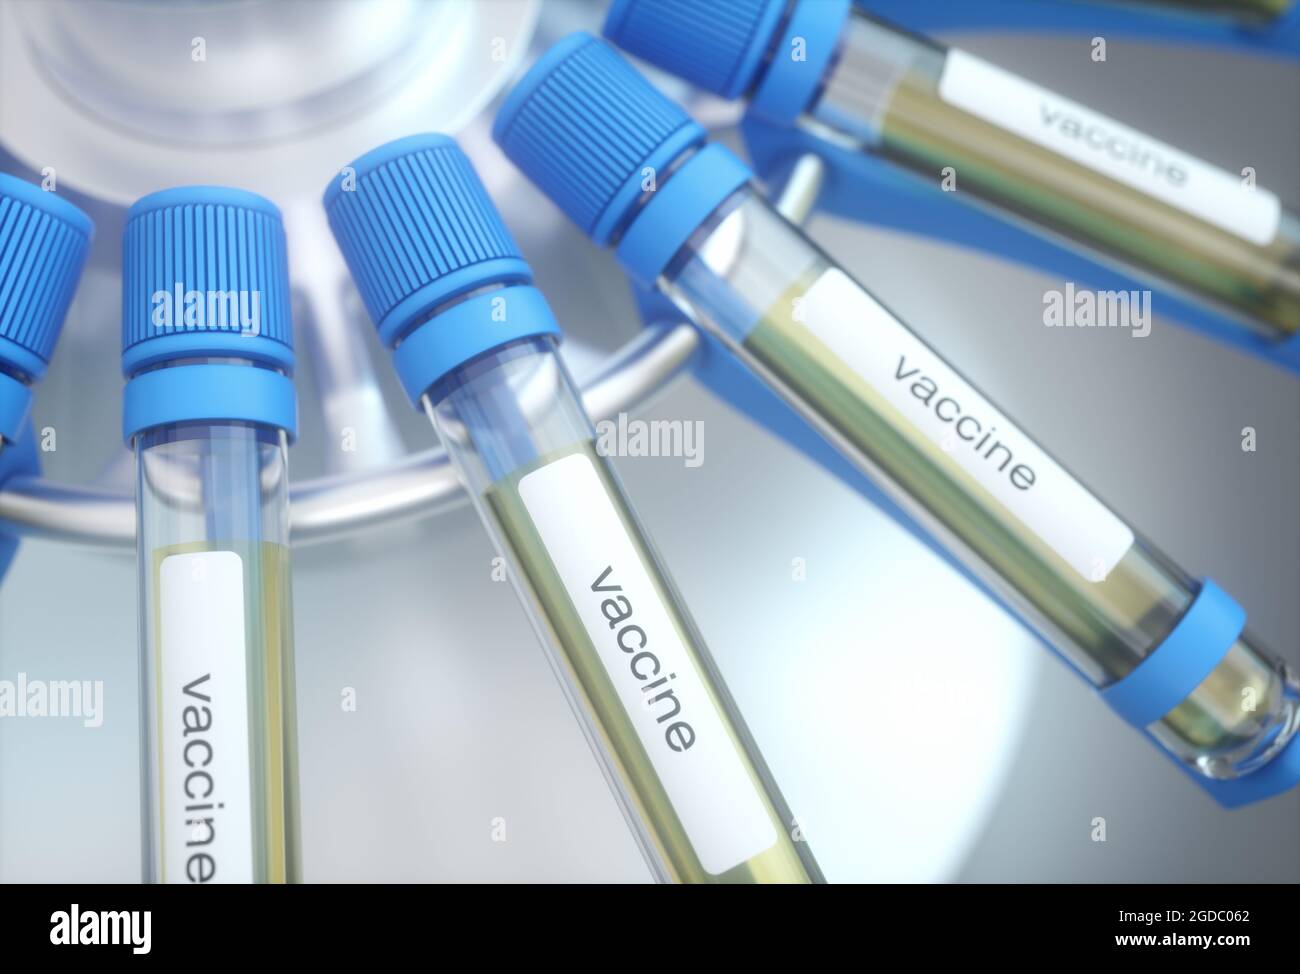 Test tube with vaccine label. Concept image 3d illustration. Stock Photo